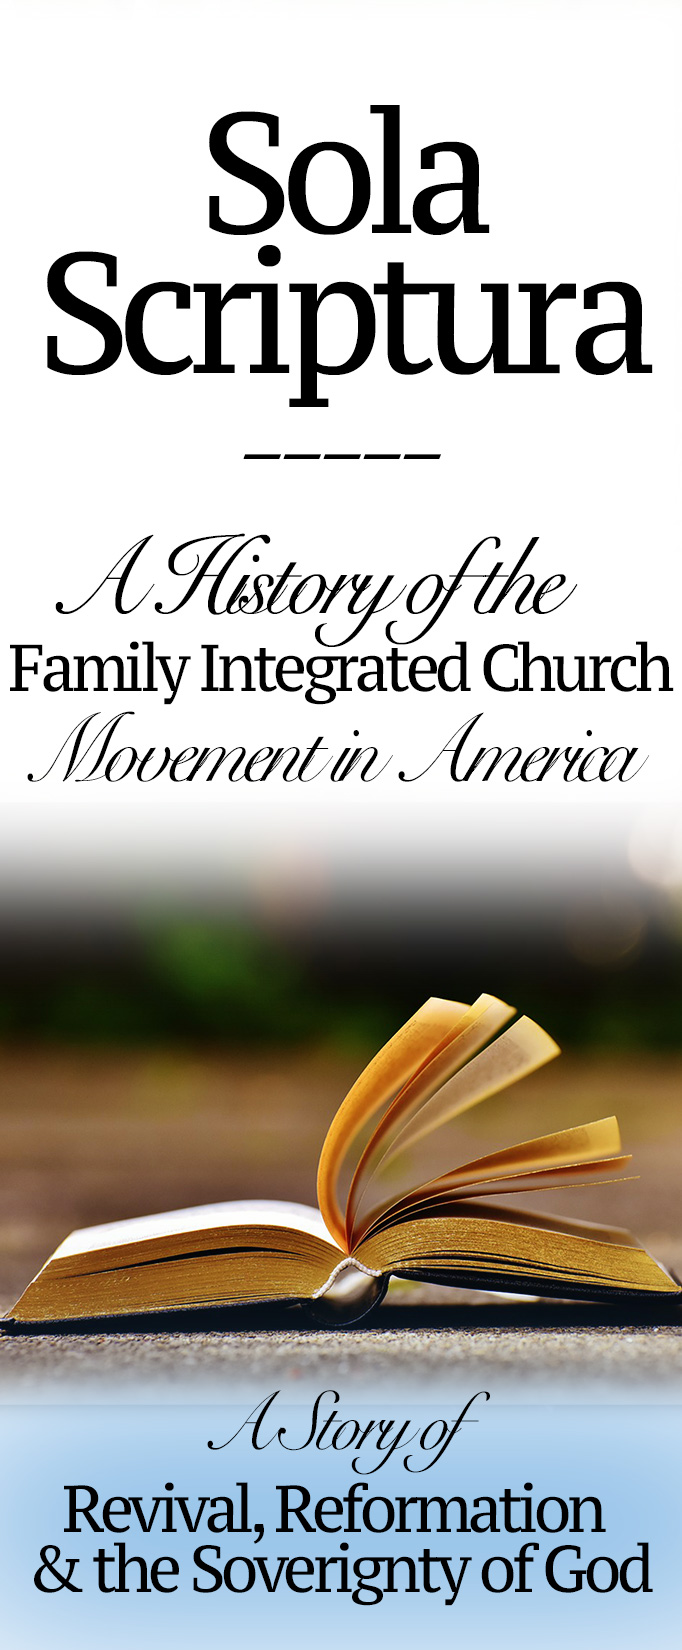 In about 2000, families started practically following the patterns laid out in the Bible in their families and churches. Thus was birthed the family integrated churches! Here’s that history…